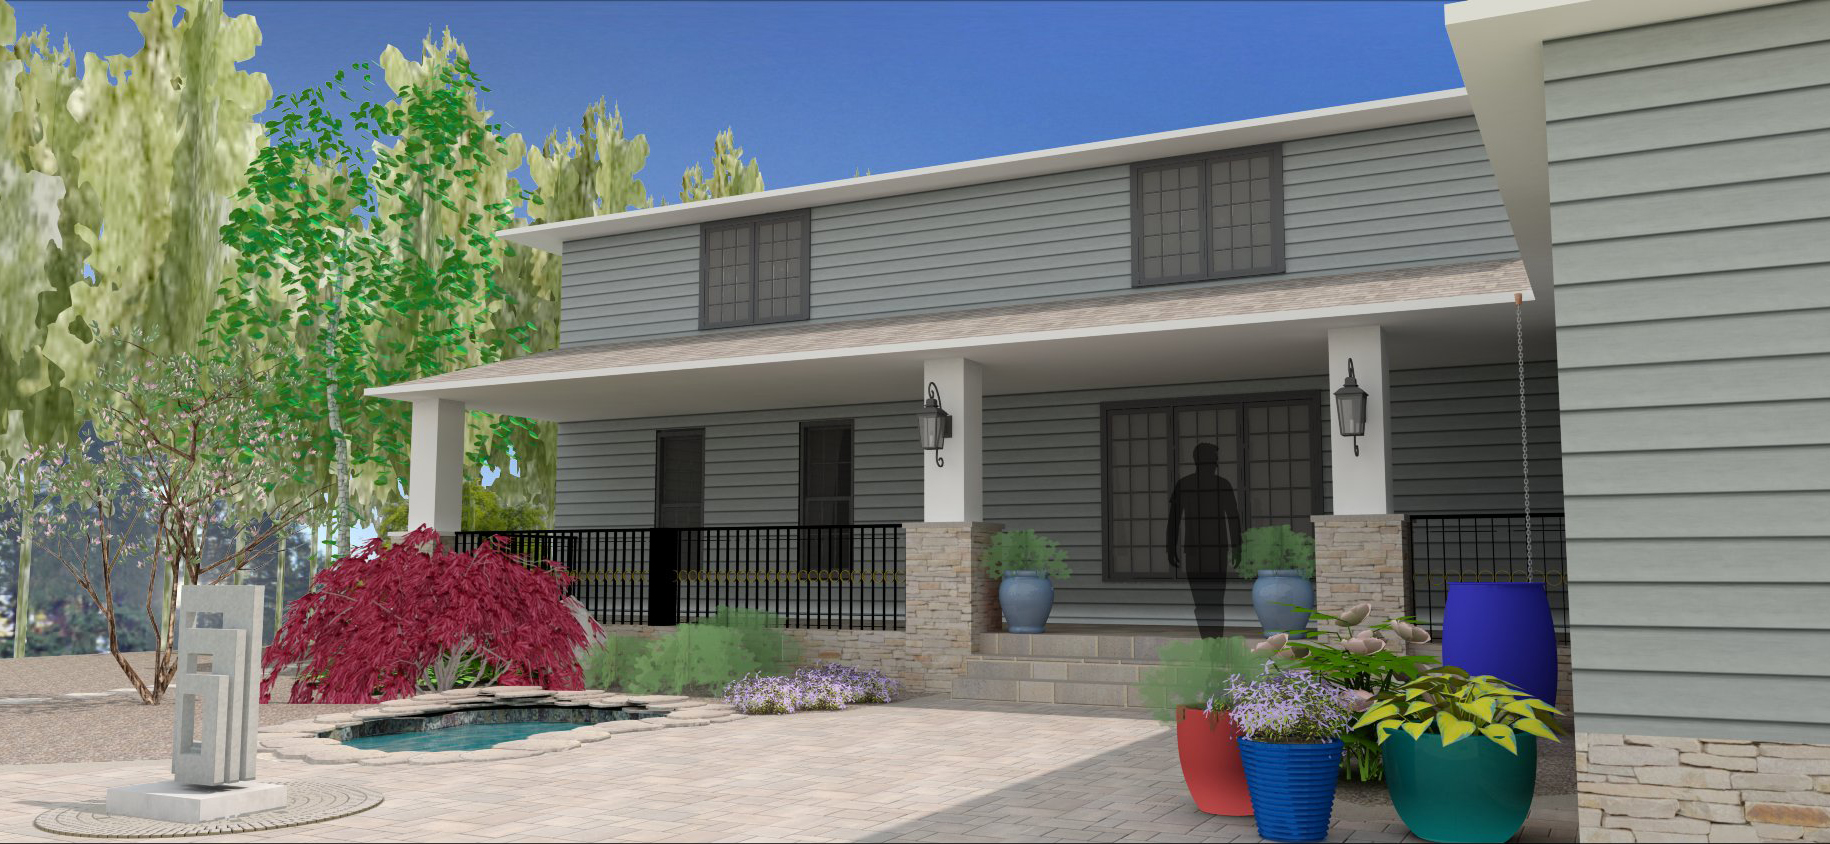 Richardson Rendering - Front Yard 3 with shadows.jpg